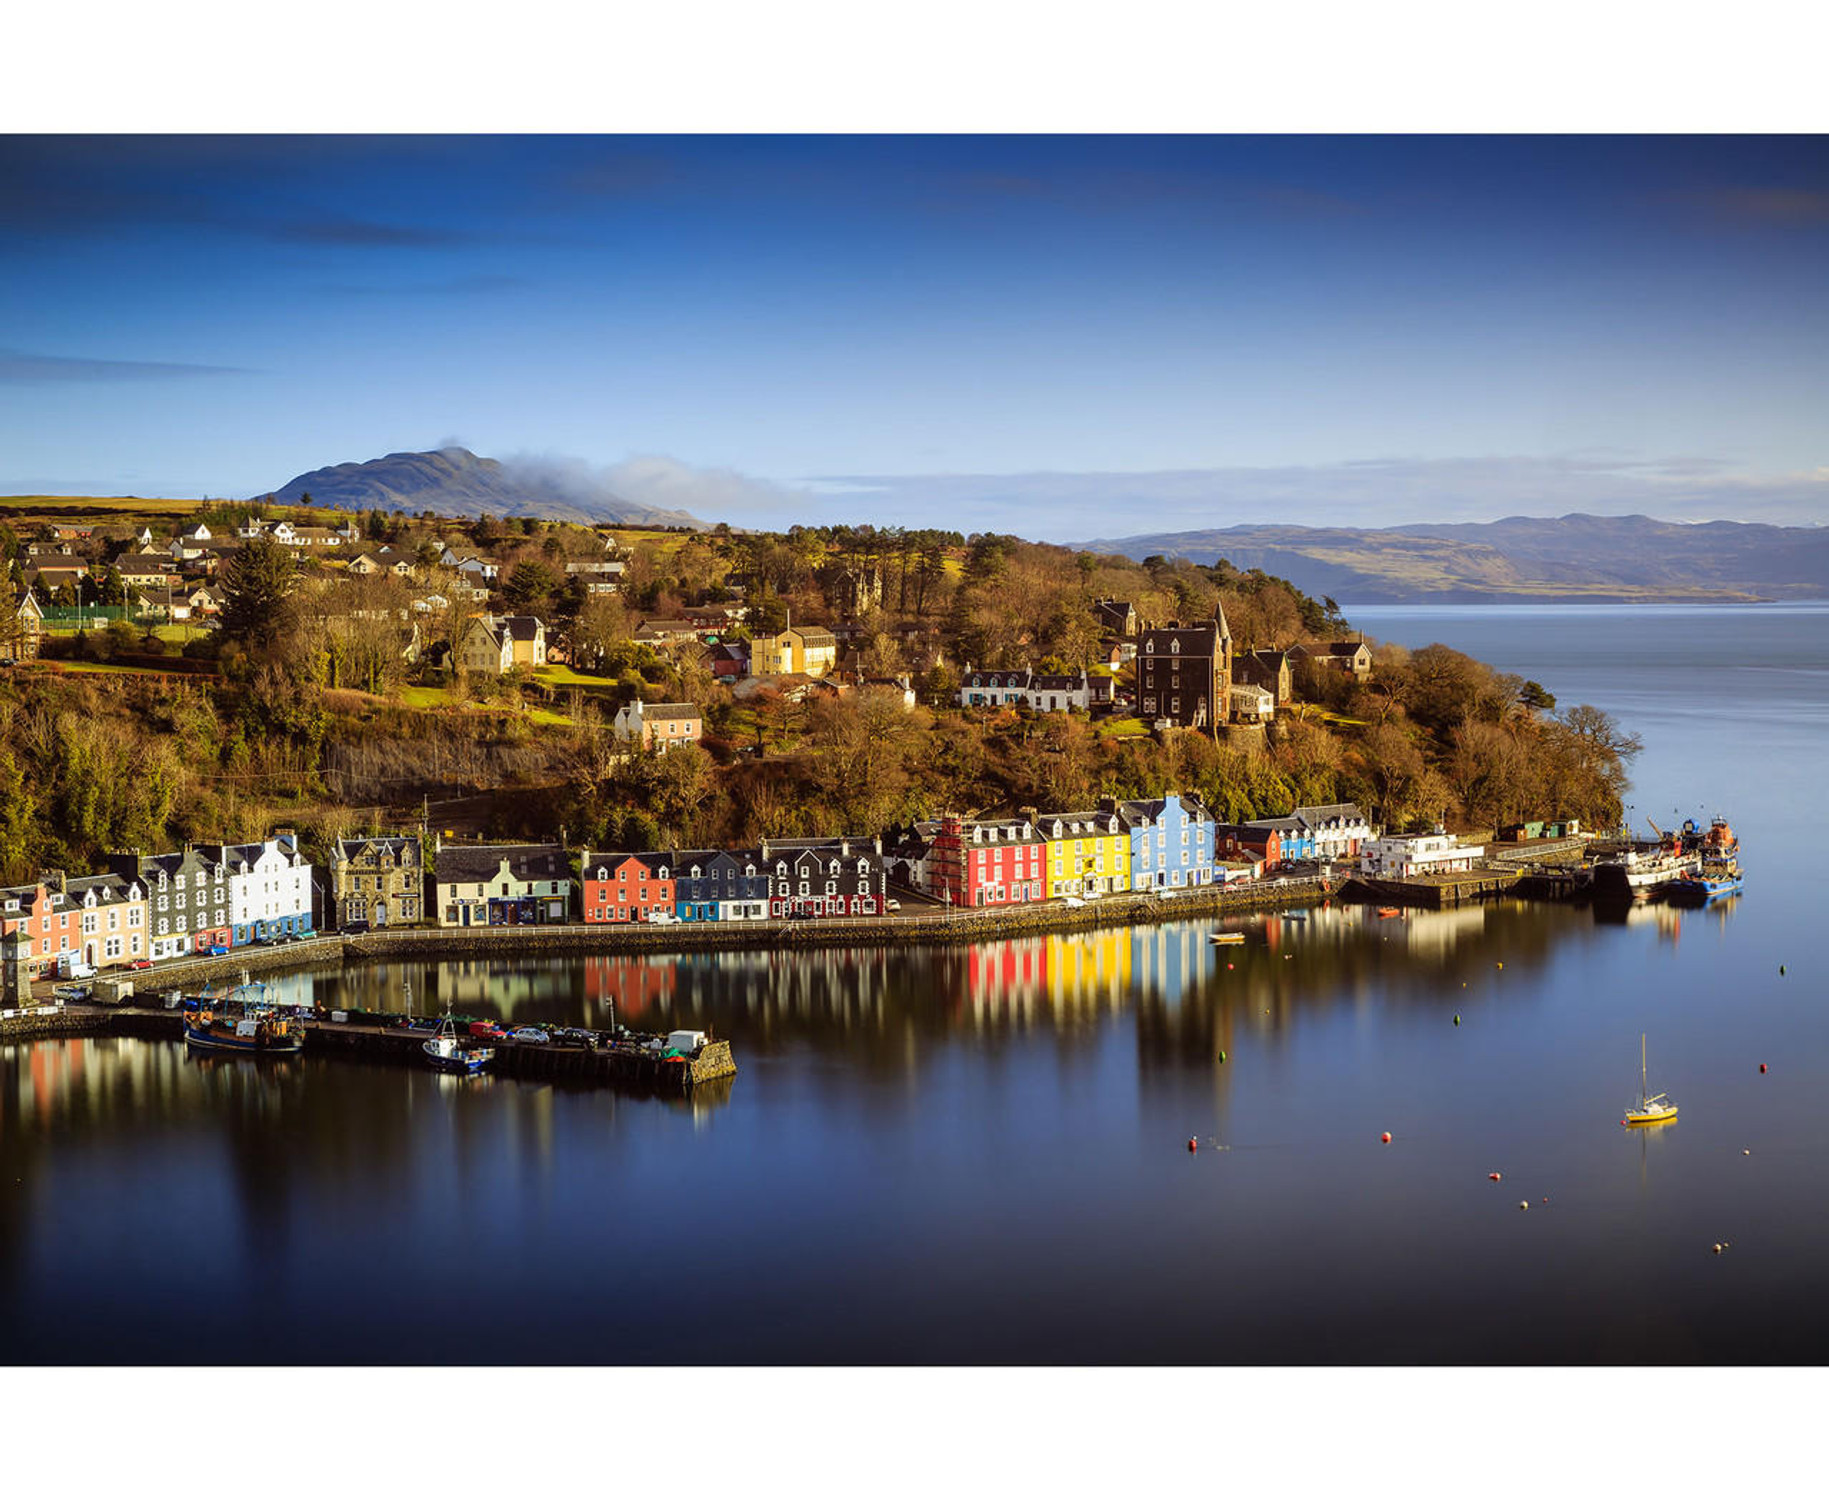 Tobermory Isle of Mull Scotland Aerial View Wall Mural, image 1, World Maps Online